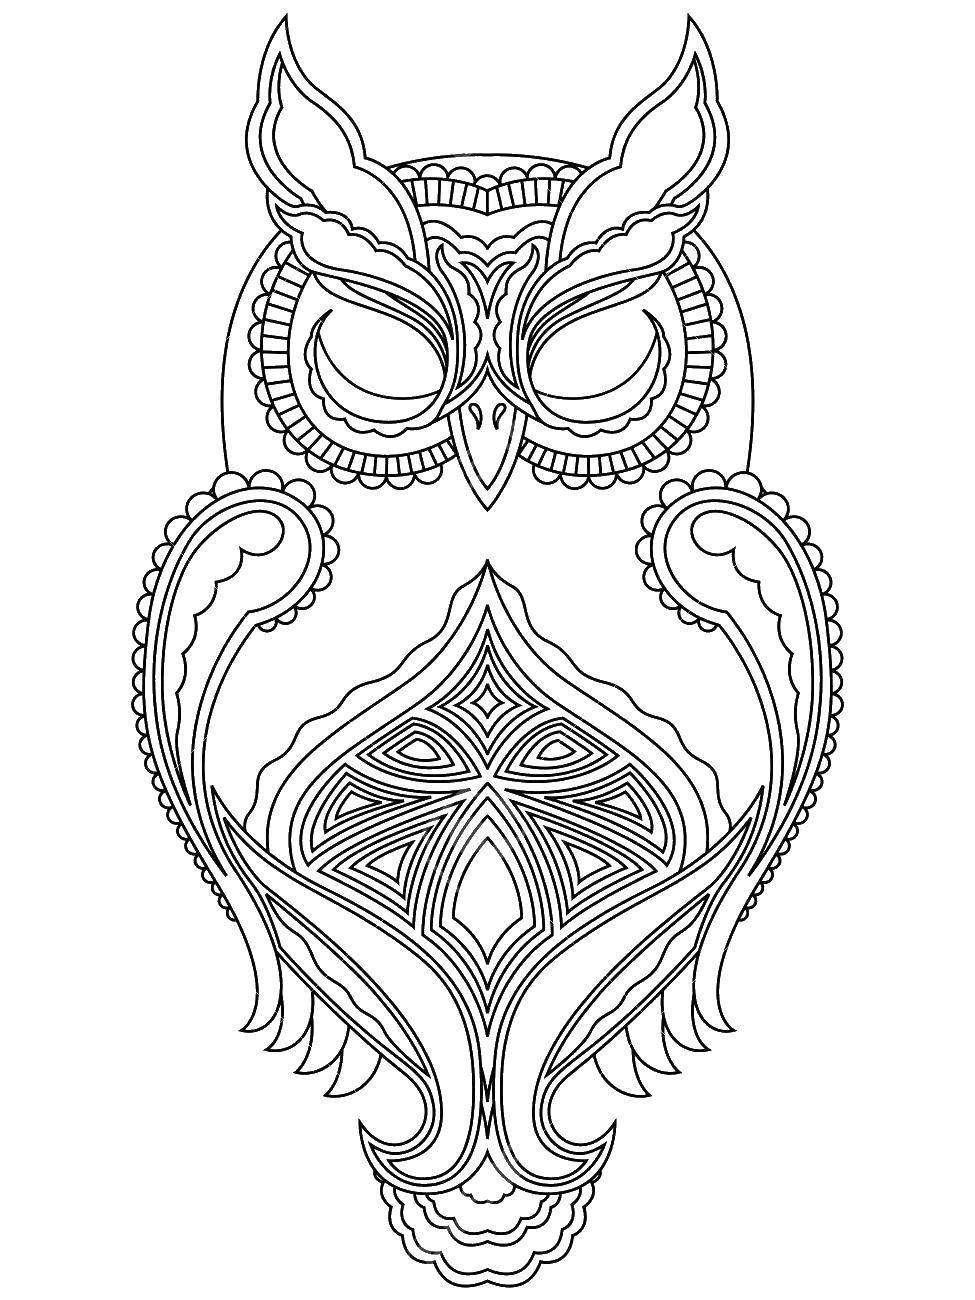 Coloring Owl pattern. Category birds. Tags:  Owl patterns.